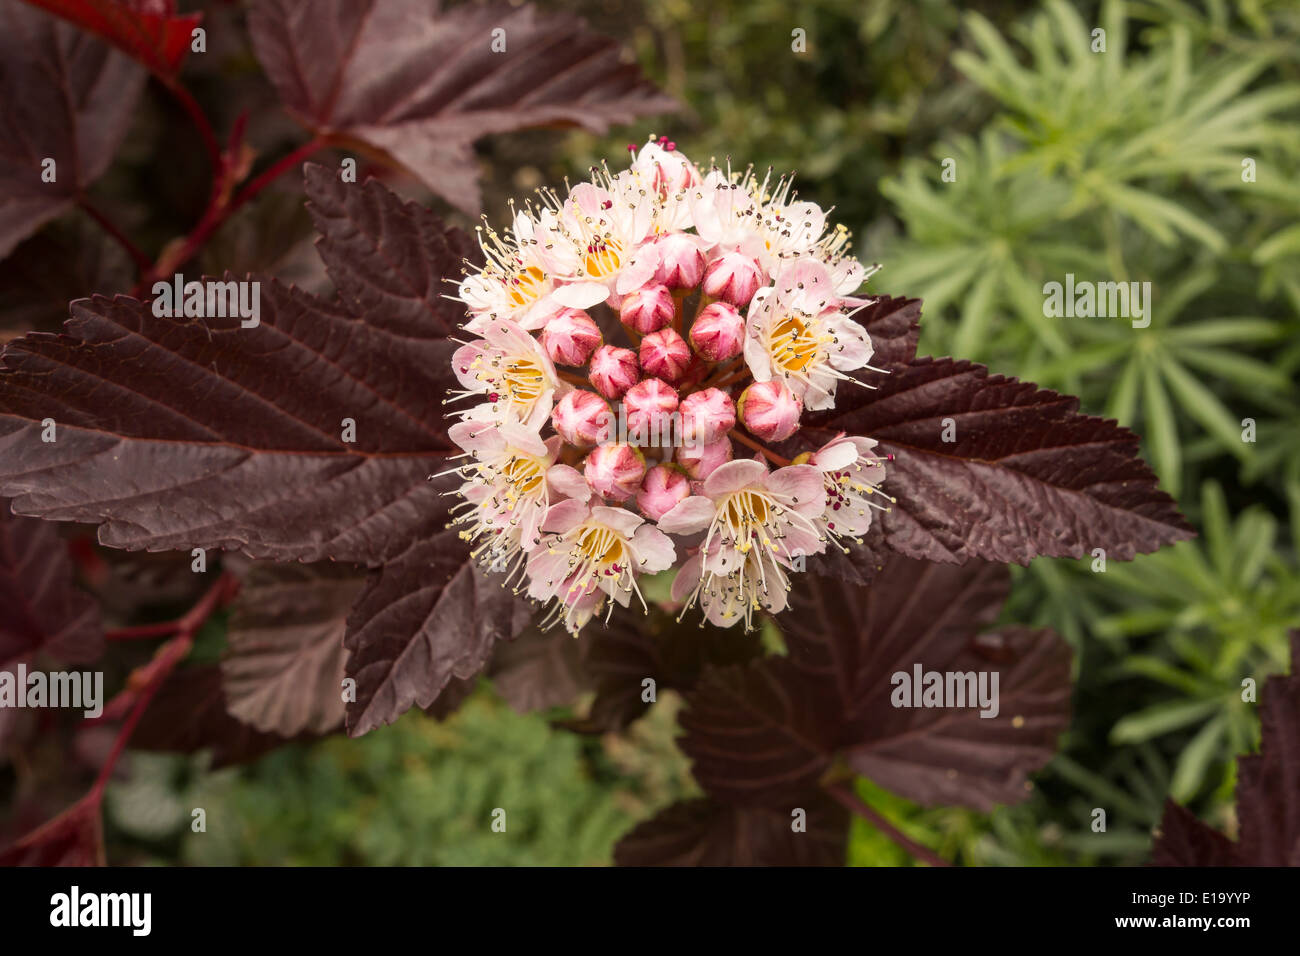 Flower of Physocarpus opulifolius or Lady in red plant Stock Photo